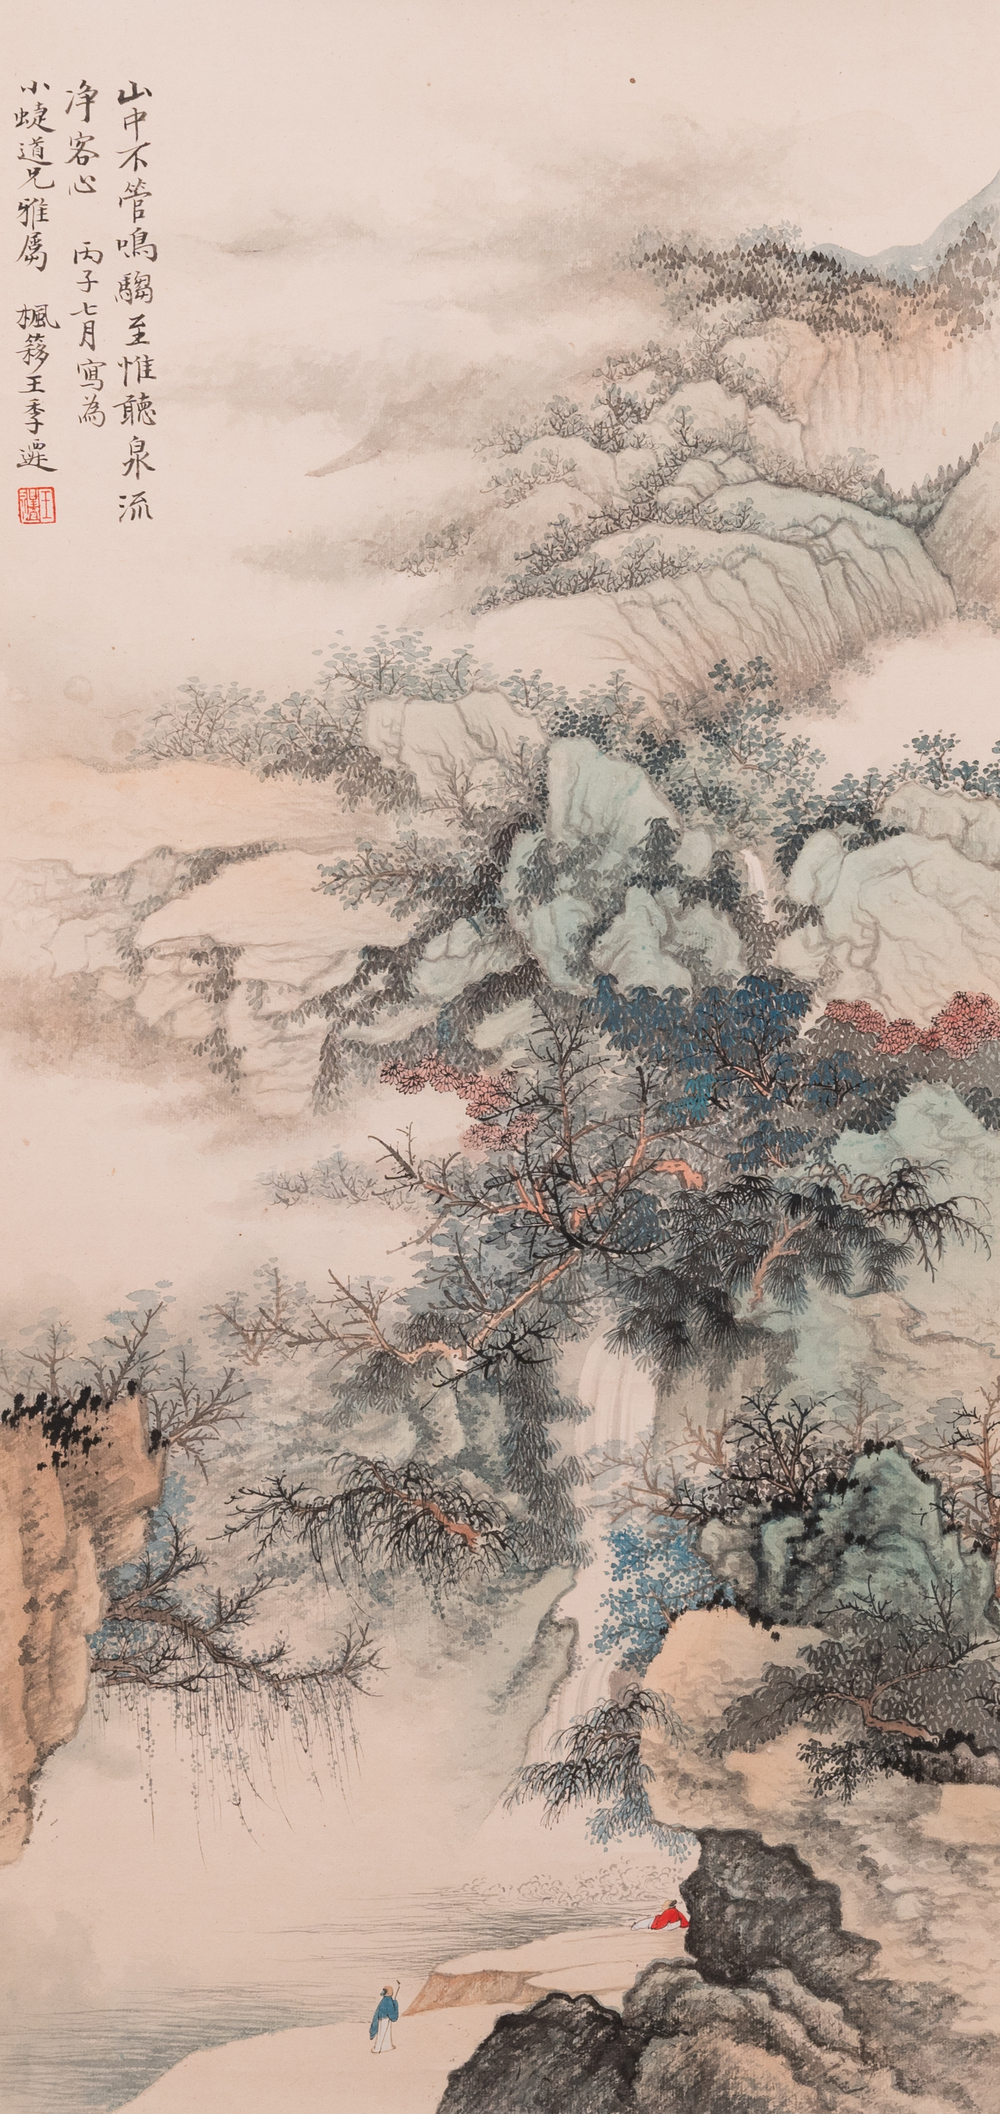 Wang Jiqian 王季遷 (1906-2003): 'Landscape with waterfall', ink and colour on paper, dated 1996